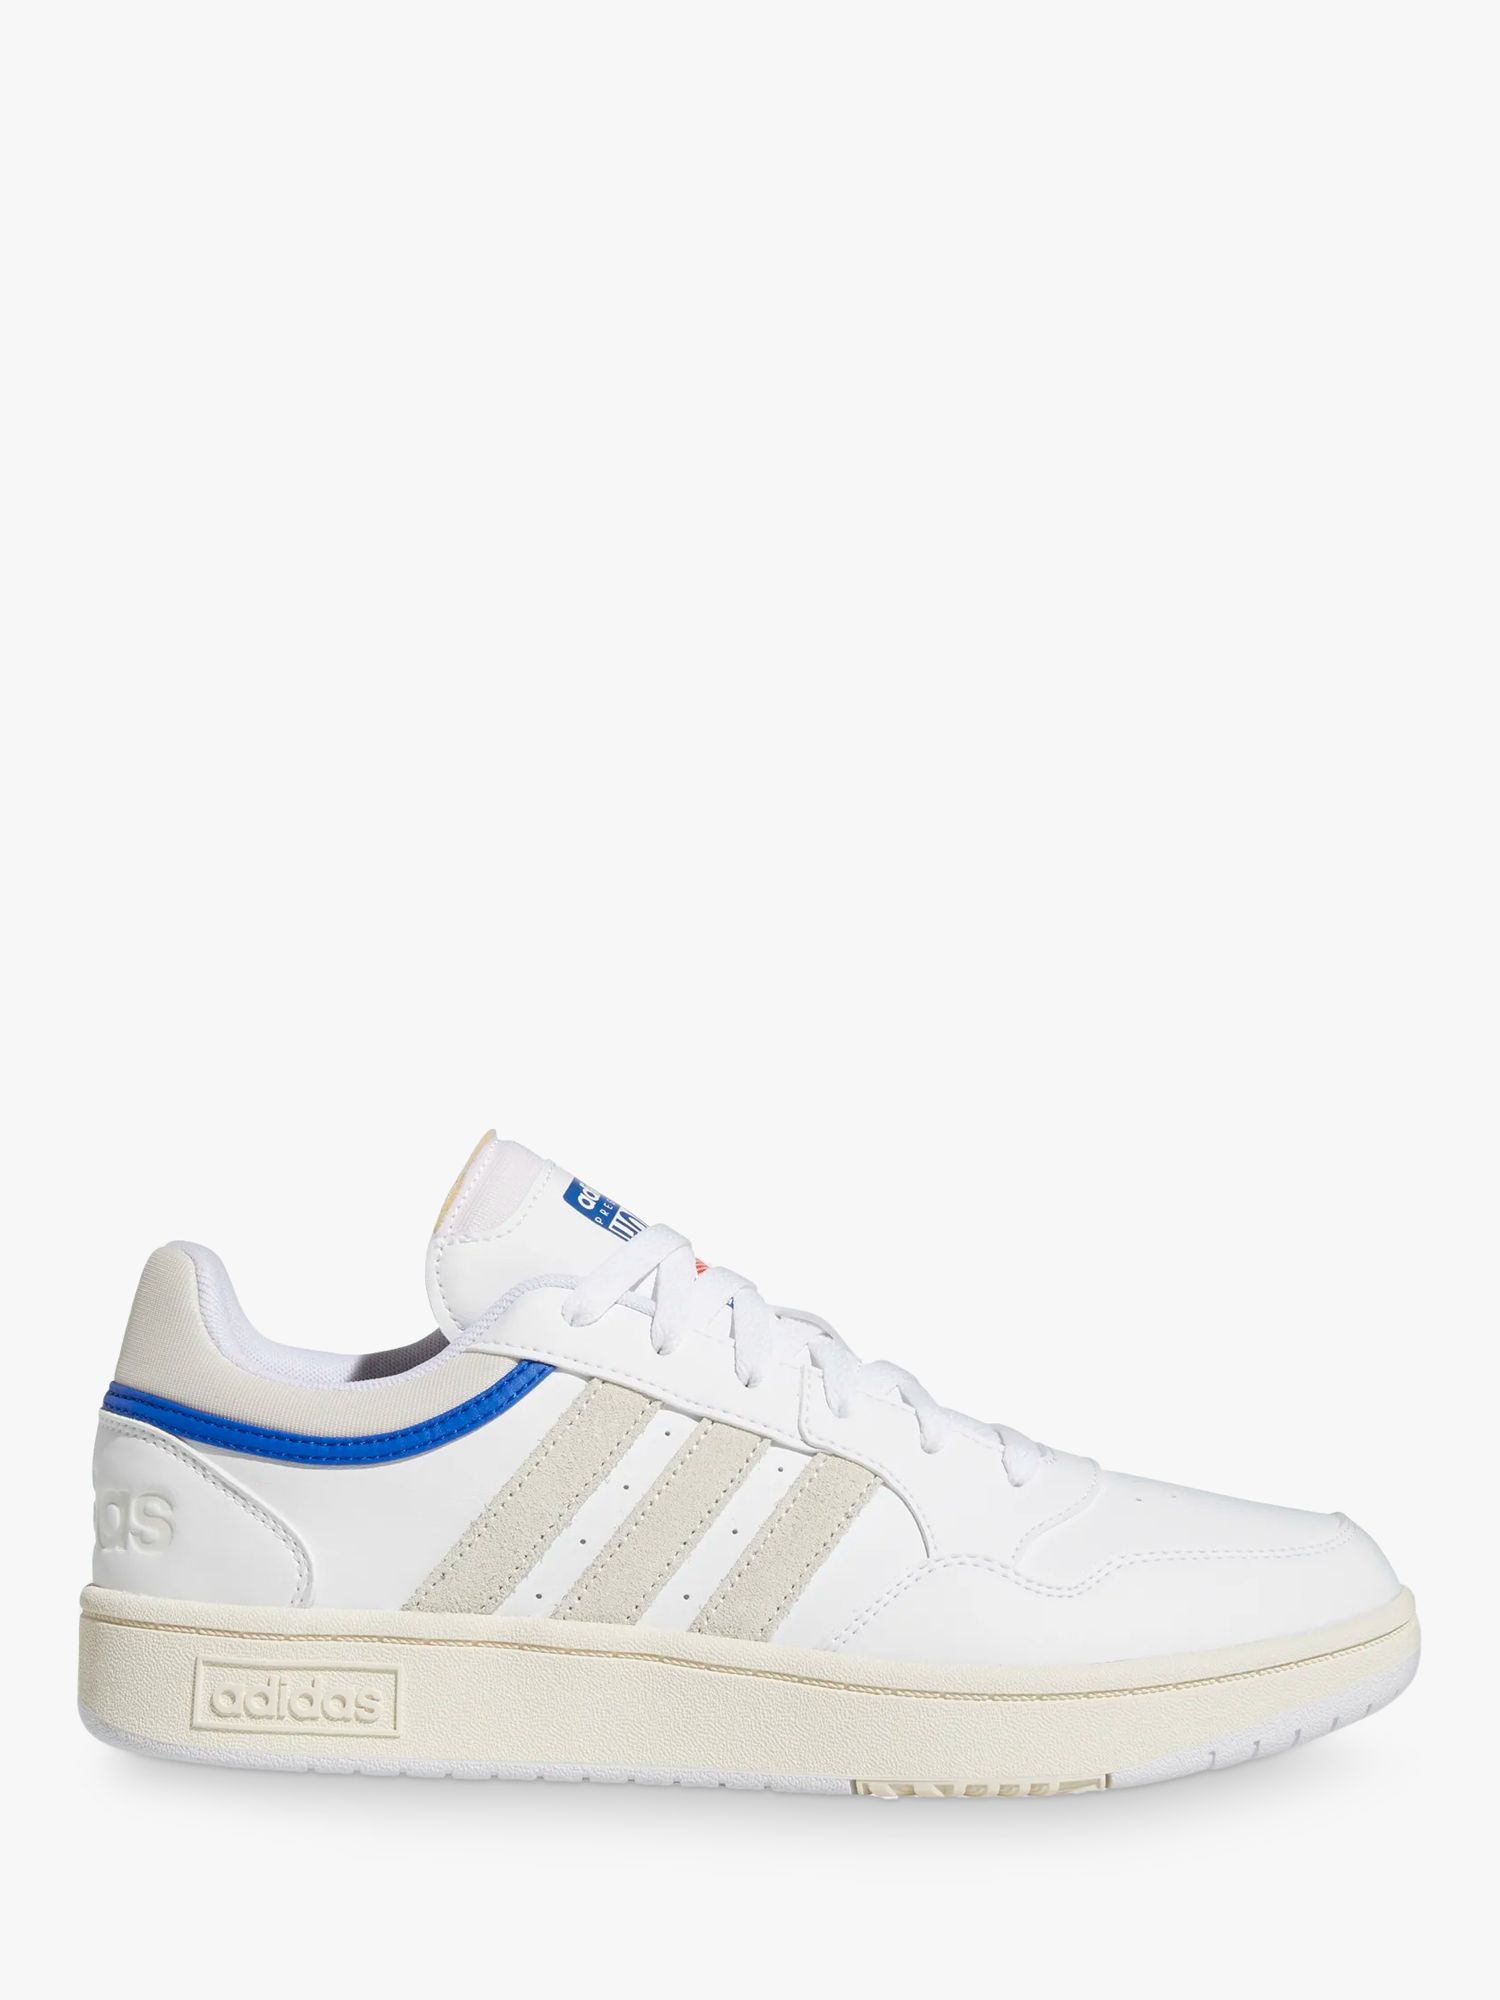 adidas Hoops 3.0 Men's Trainers, White, 7